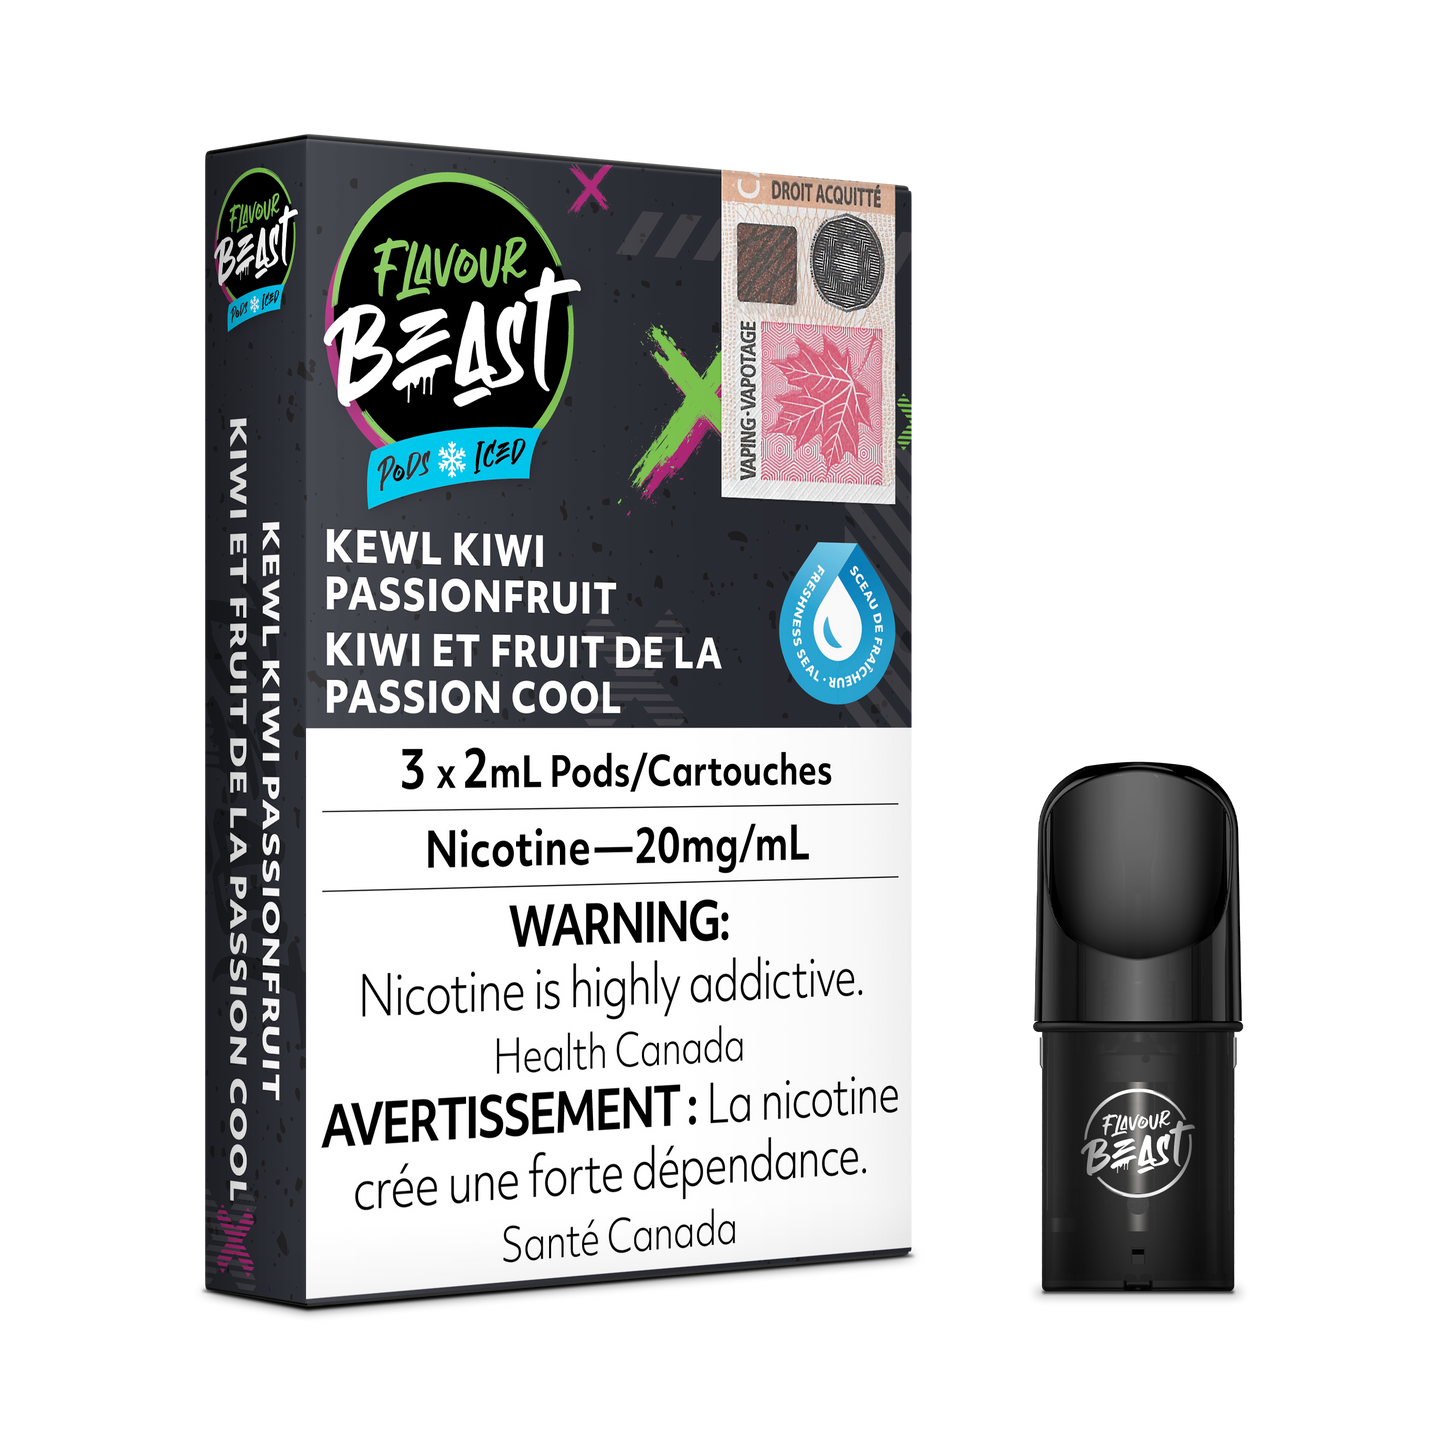 Kewl Kiwi Passionfruit Iced by Flavour Beast Pods